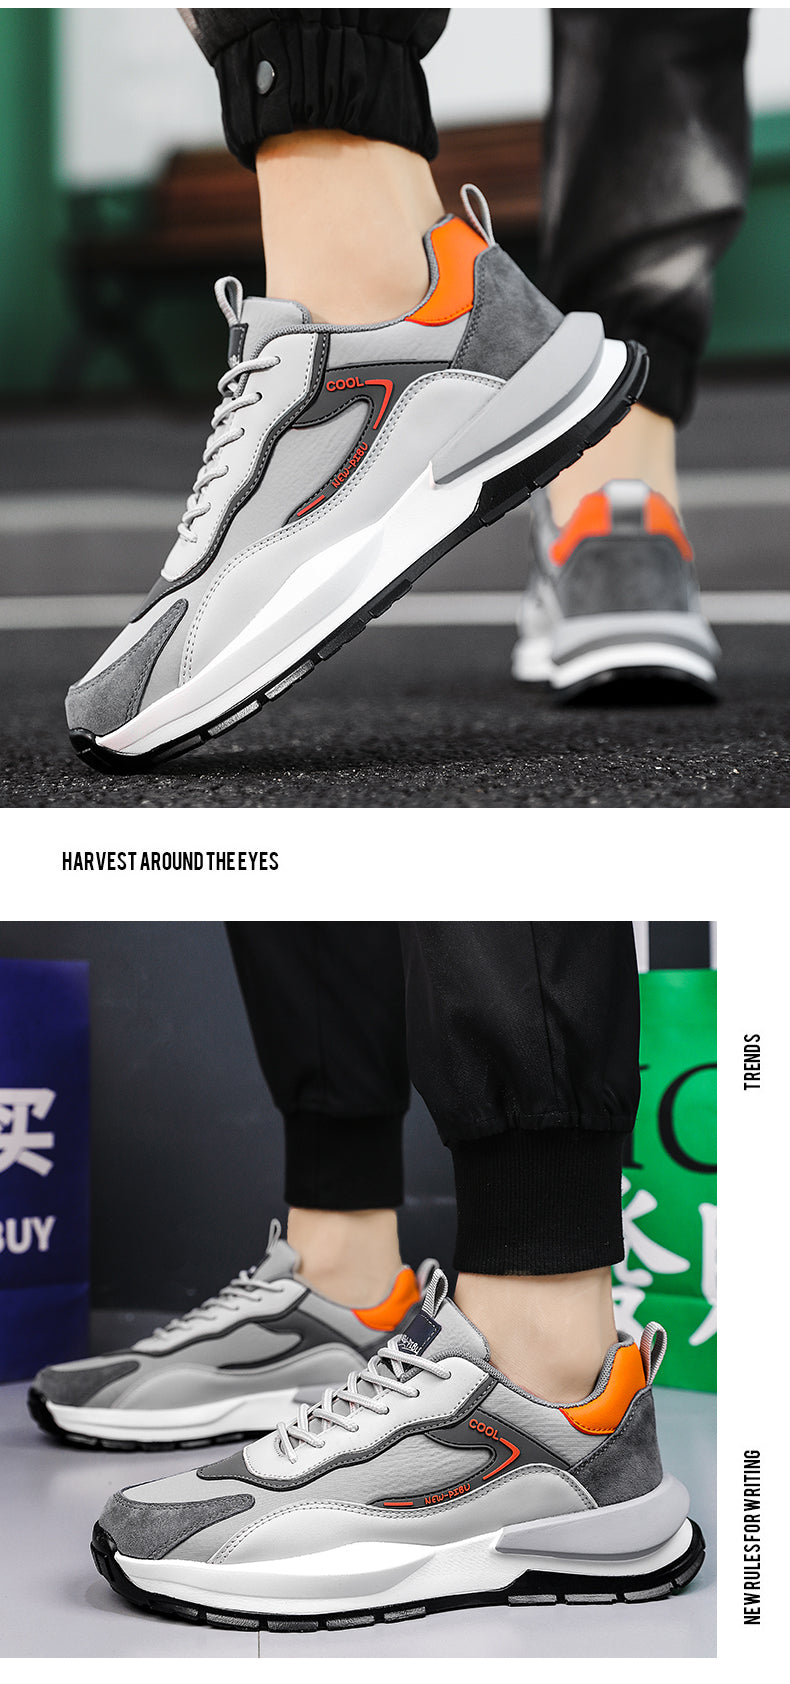 Men's Running Mesh Breathable Wear-resistant Tennis Lightweight Men Sneakers Sports Shoes Cross Trainers The Clothing Company Sydney